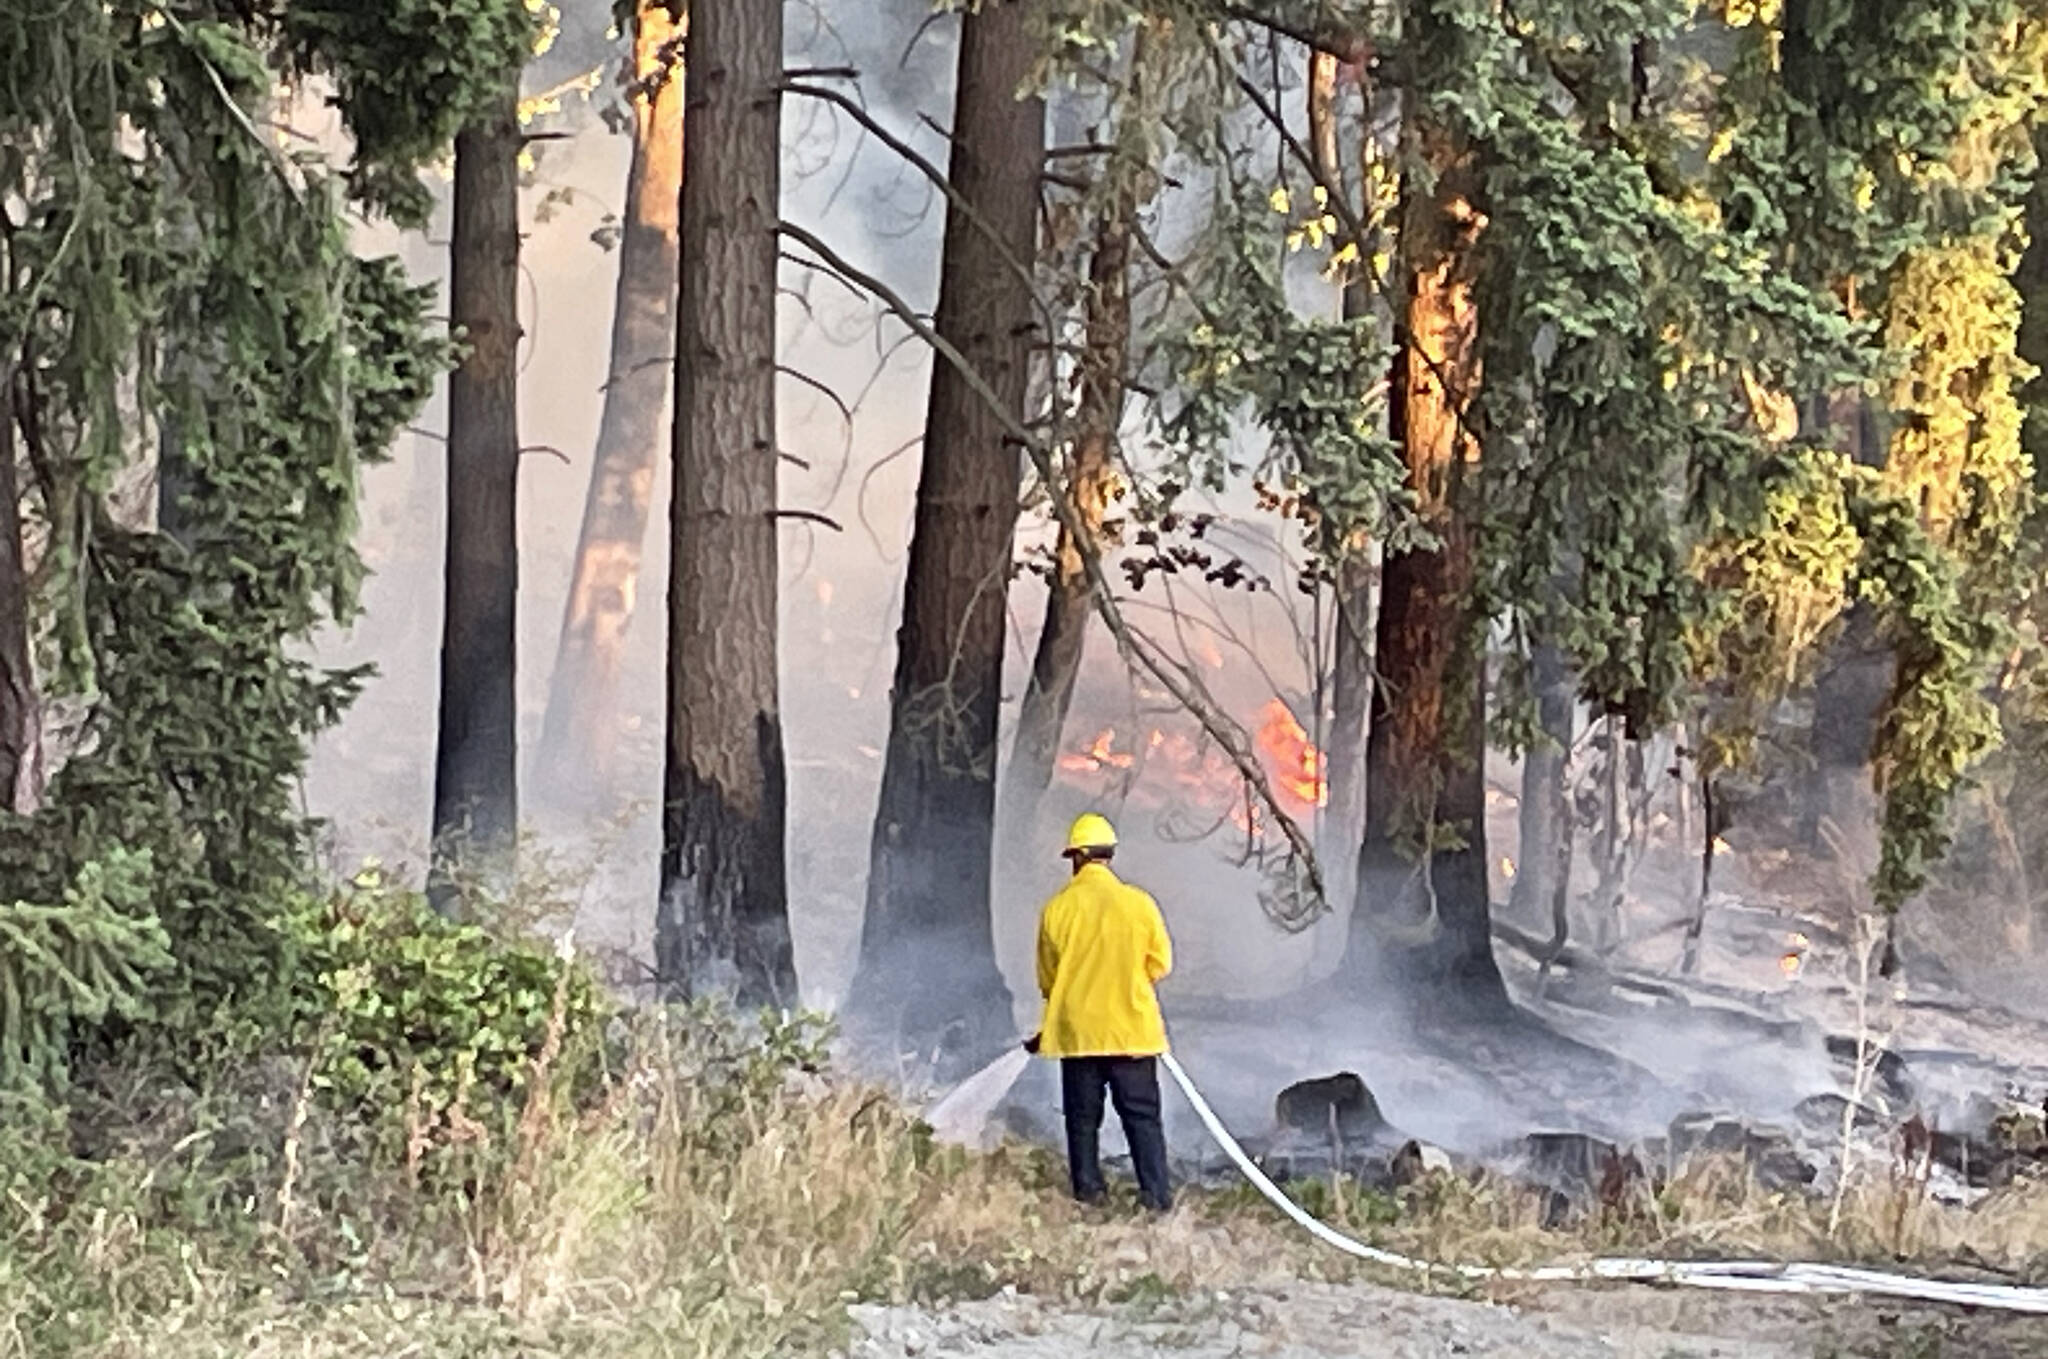 Firefighters from four agencies extinguished a brush fire Wednesday evening, Aug. 16 in the 3300 block of South 260th Street on the West Hill in Kent. COURTESY PHOTO, Puget Sound Fire